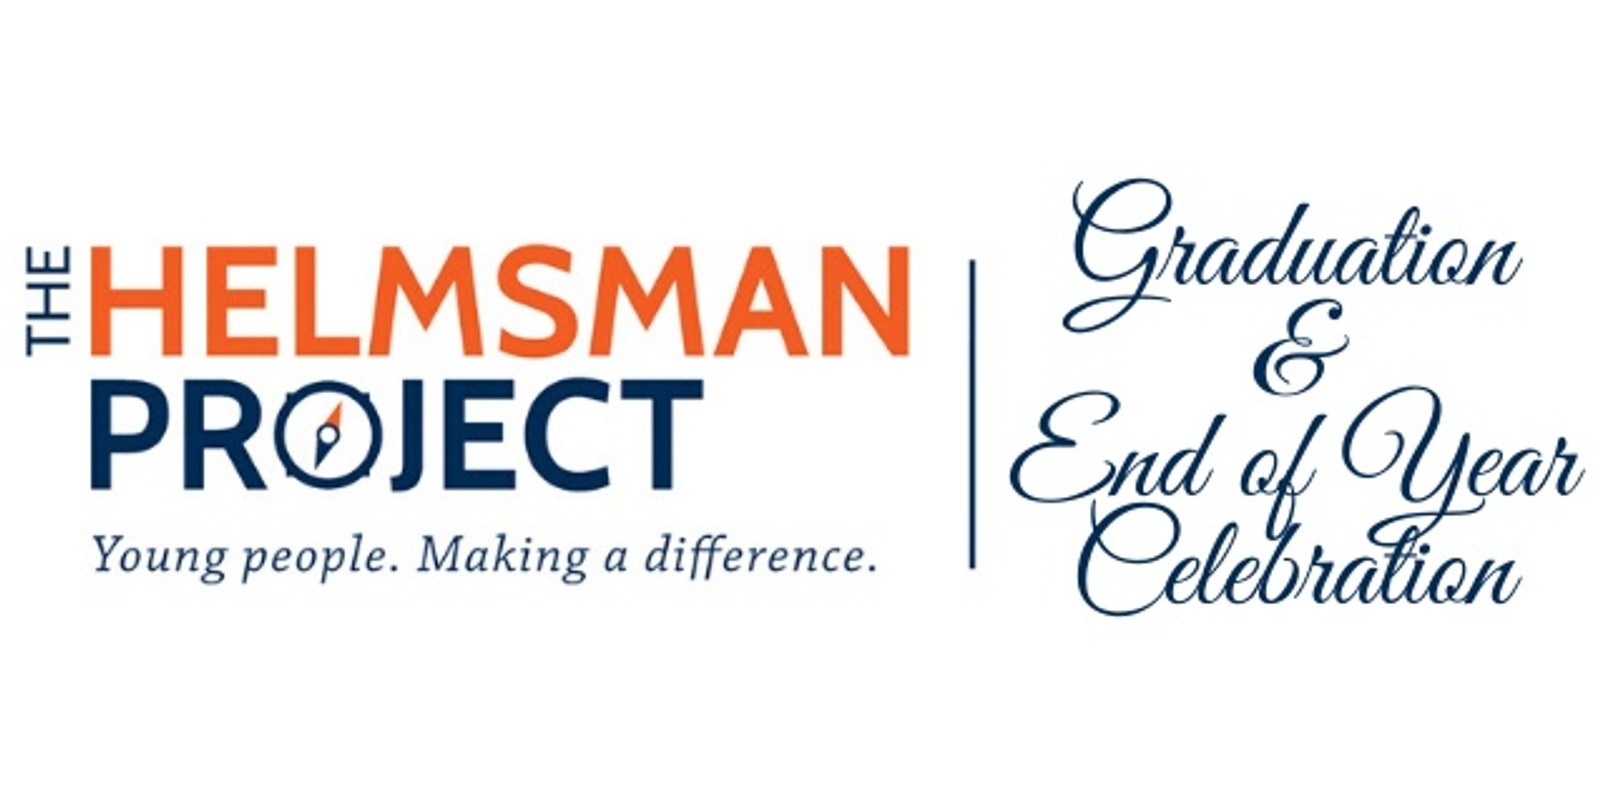 Banner image for The Helmsman Project 2019 Graduation and End of Year Celebration